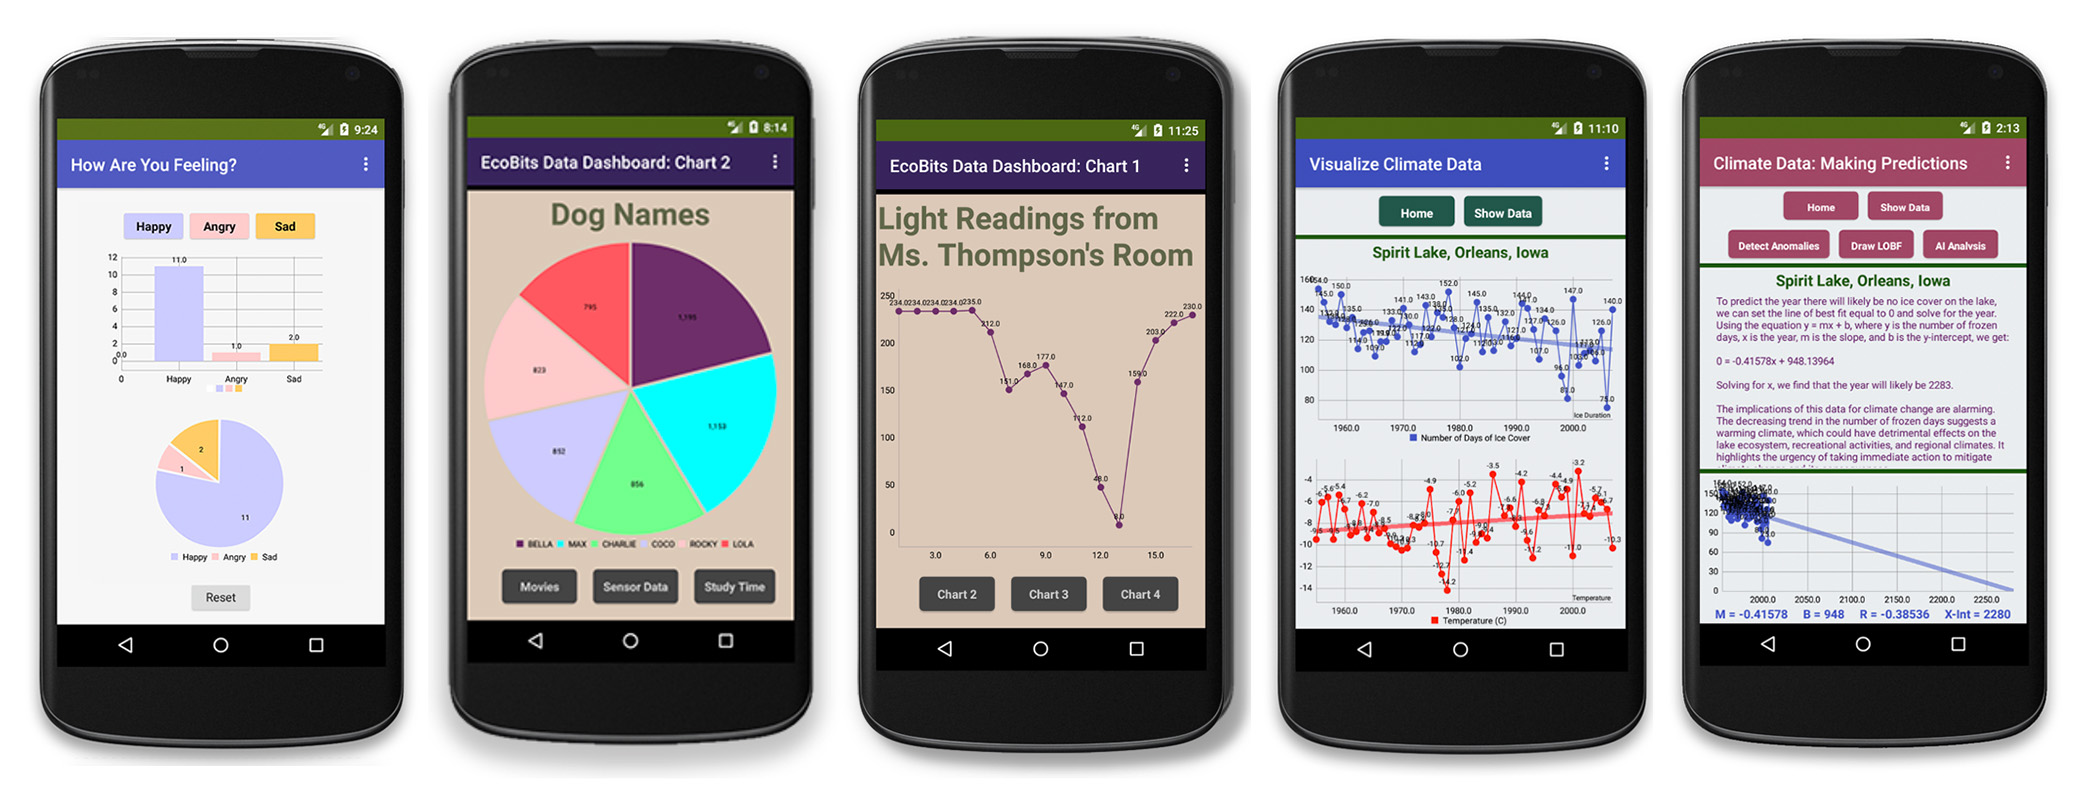 Create apps for surveys, collecting sensor data, and analyzing spreadsheet data.